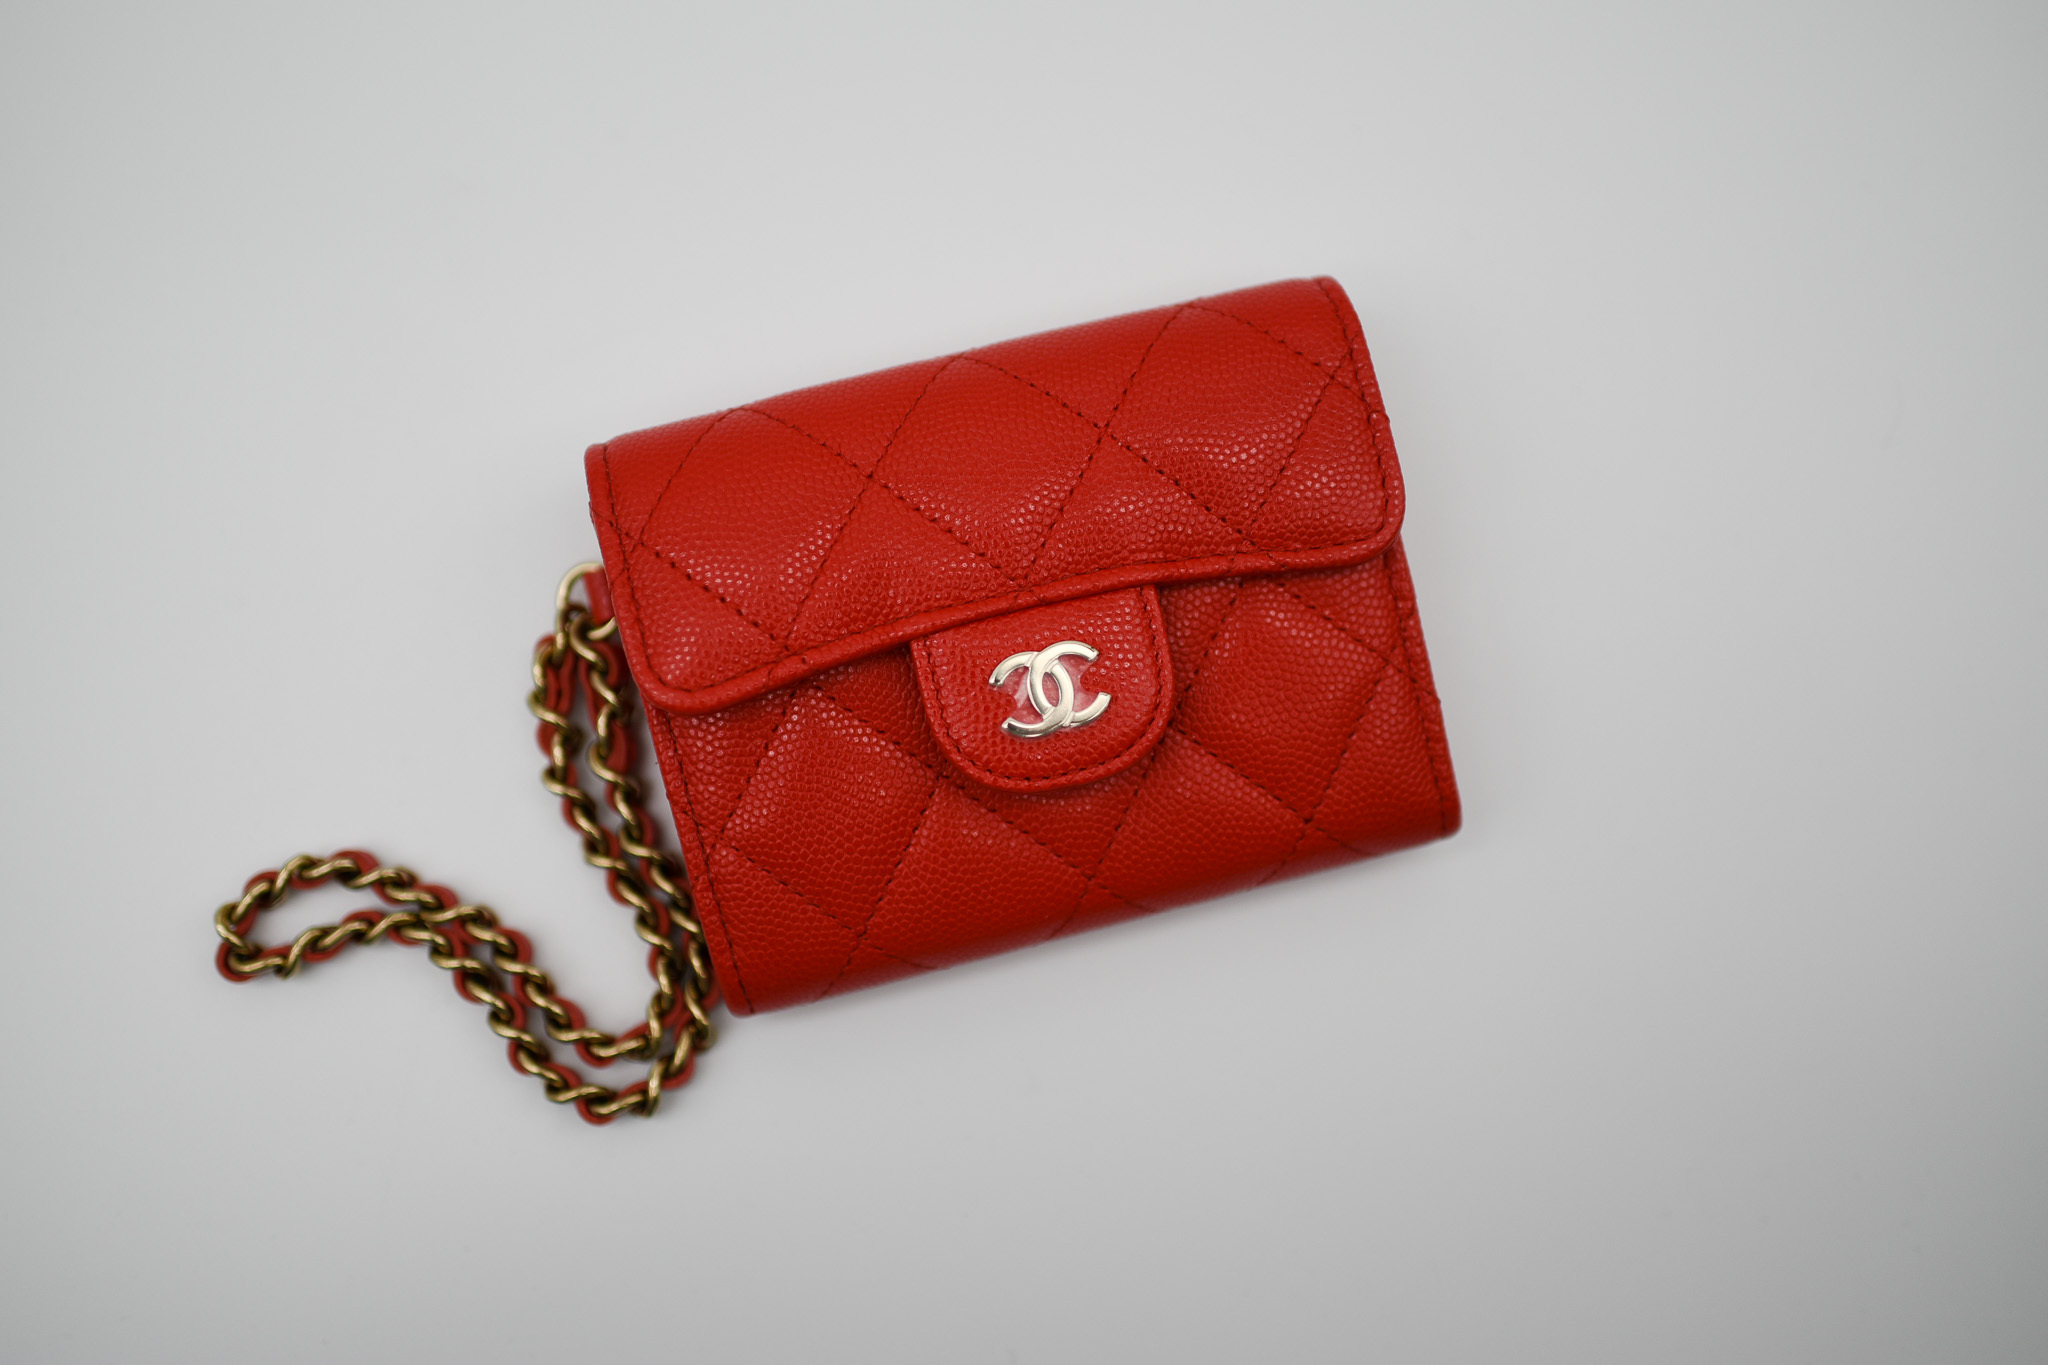 Chanel Wristlet Card Holder, Red Caviar with Gold Hardware, New in